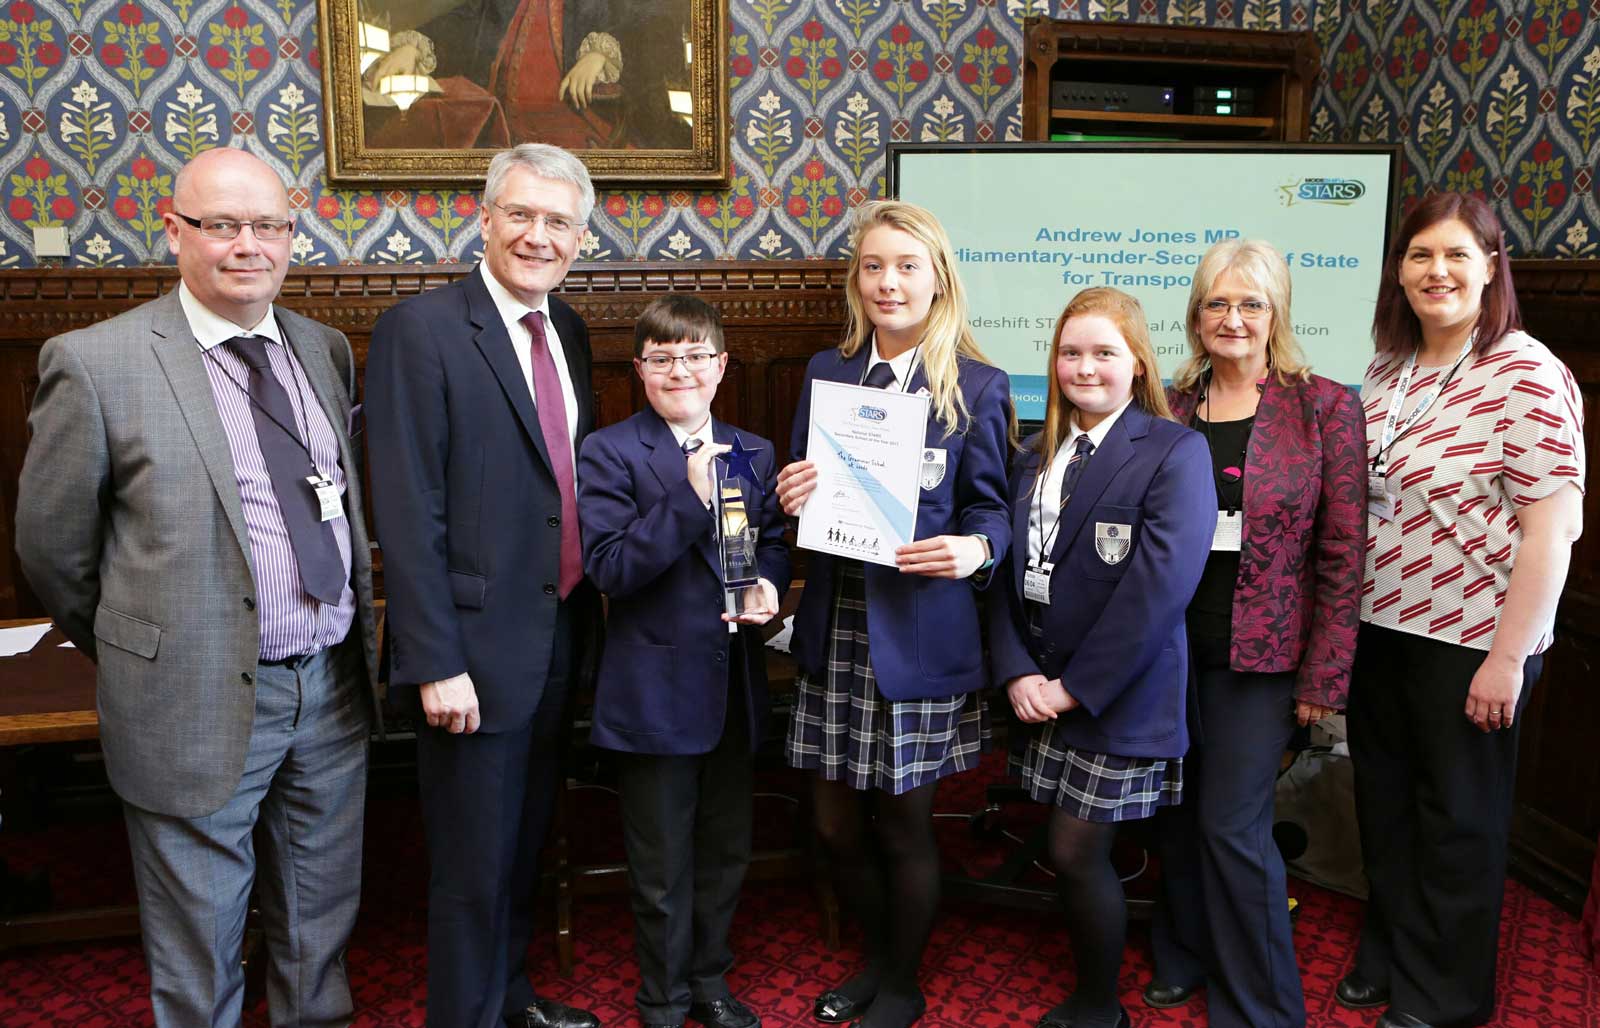 aul Womersley, GSAL director of estates, Andrew Jones MP, GSAL pupils Ben Cavasi Y7, Alice MacKenzie Y10 and Milly MacKenzie Y8, Shirley Jeffs,  GSAL Transport, and Sarah Grattage, Vice Chair of Modeshift